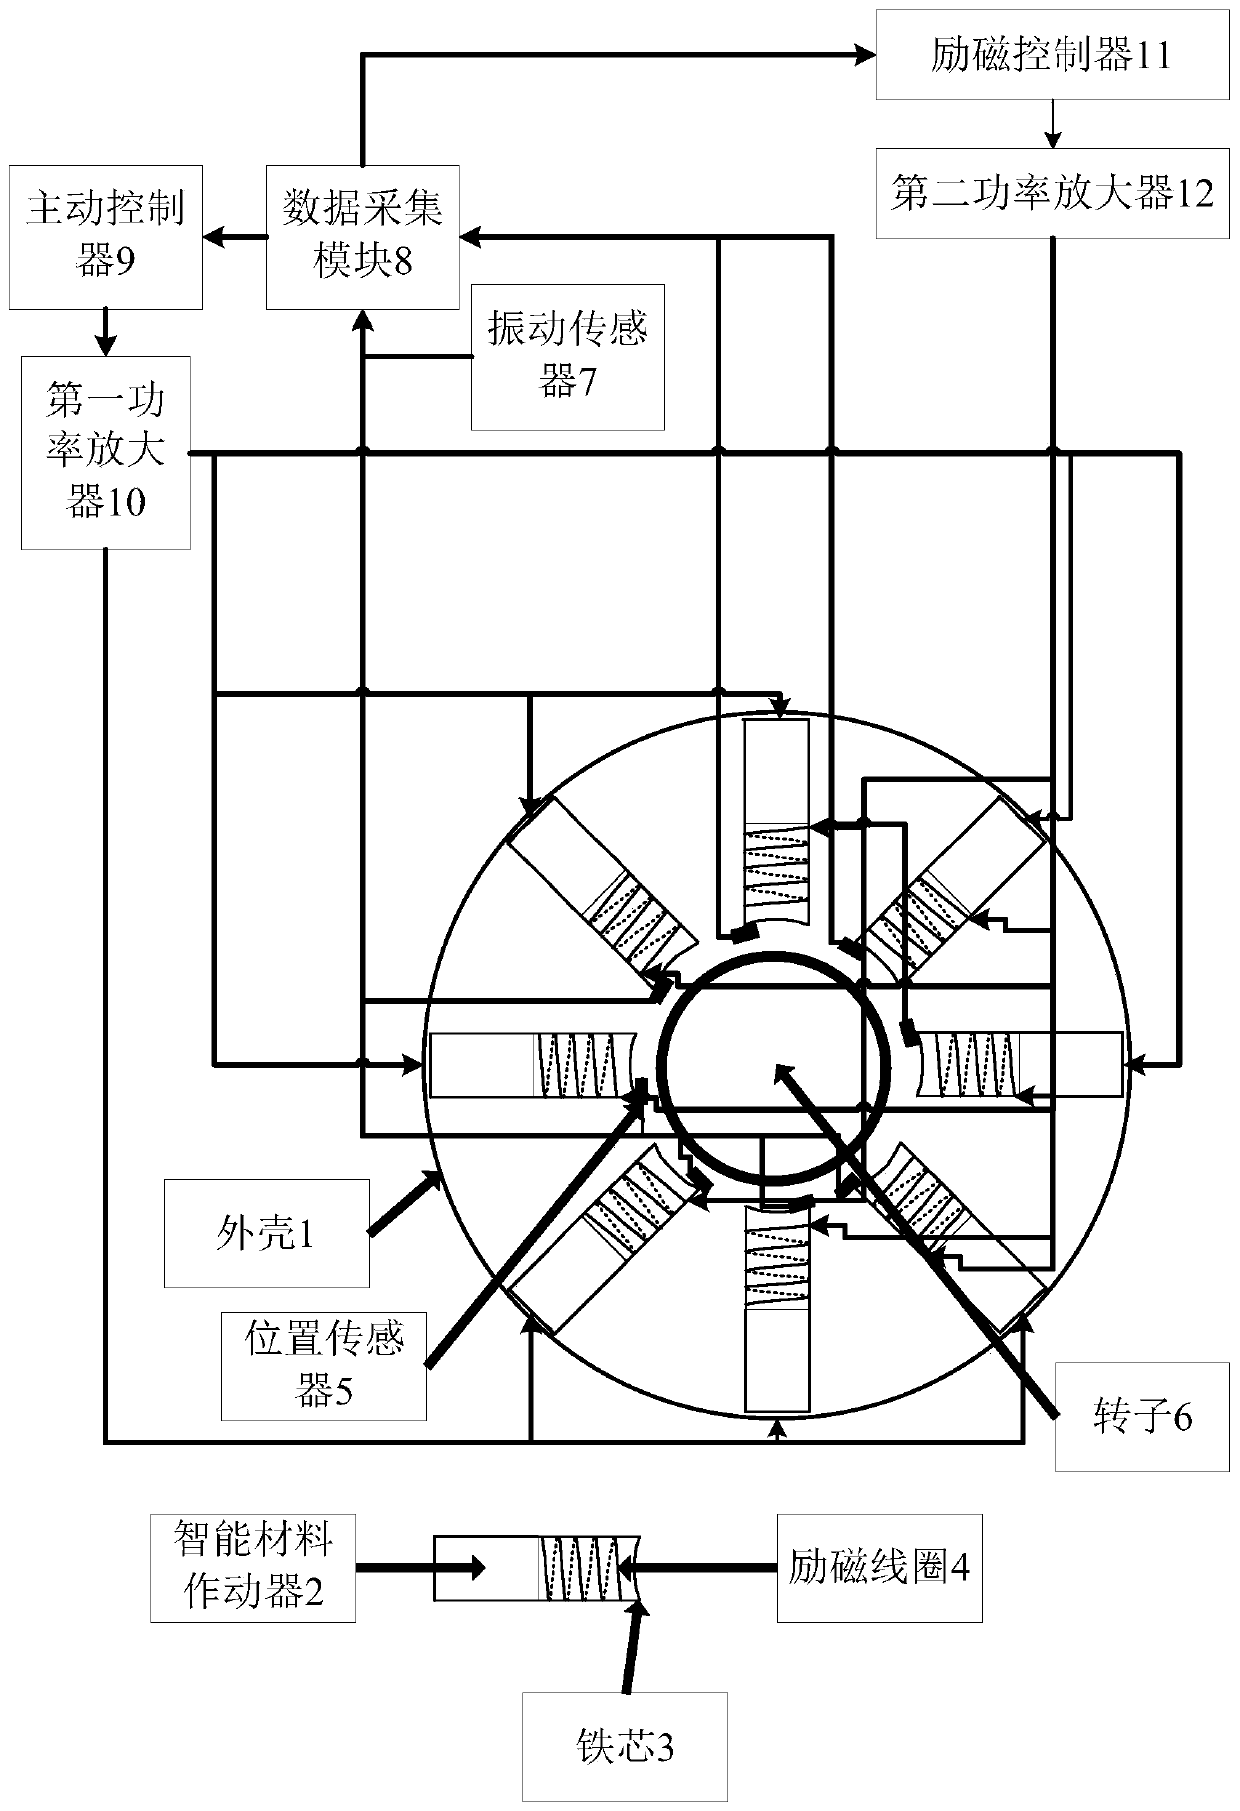 Driving magnetic bearing system based on intelligent material controllable shafting radial vibration